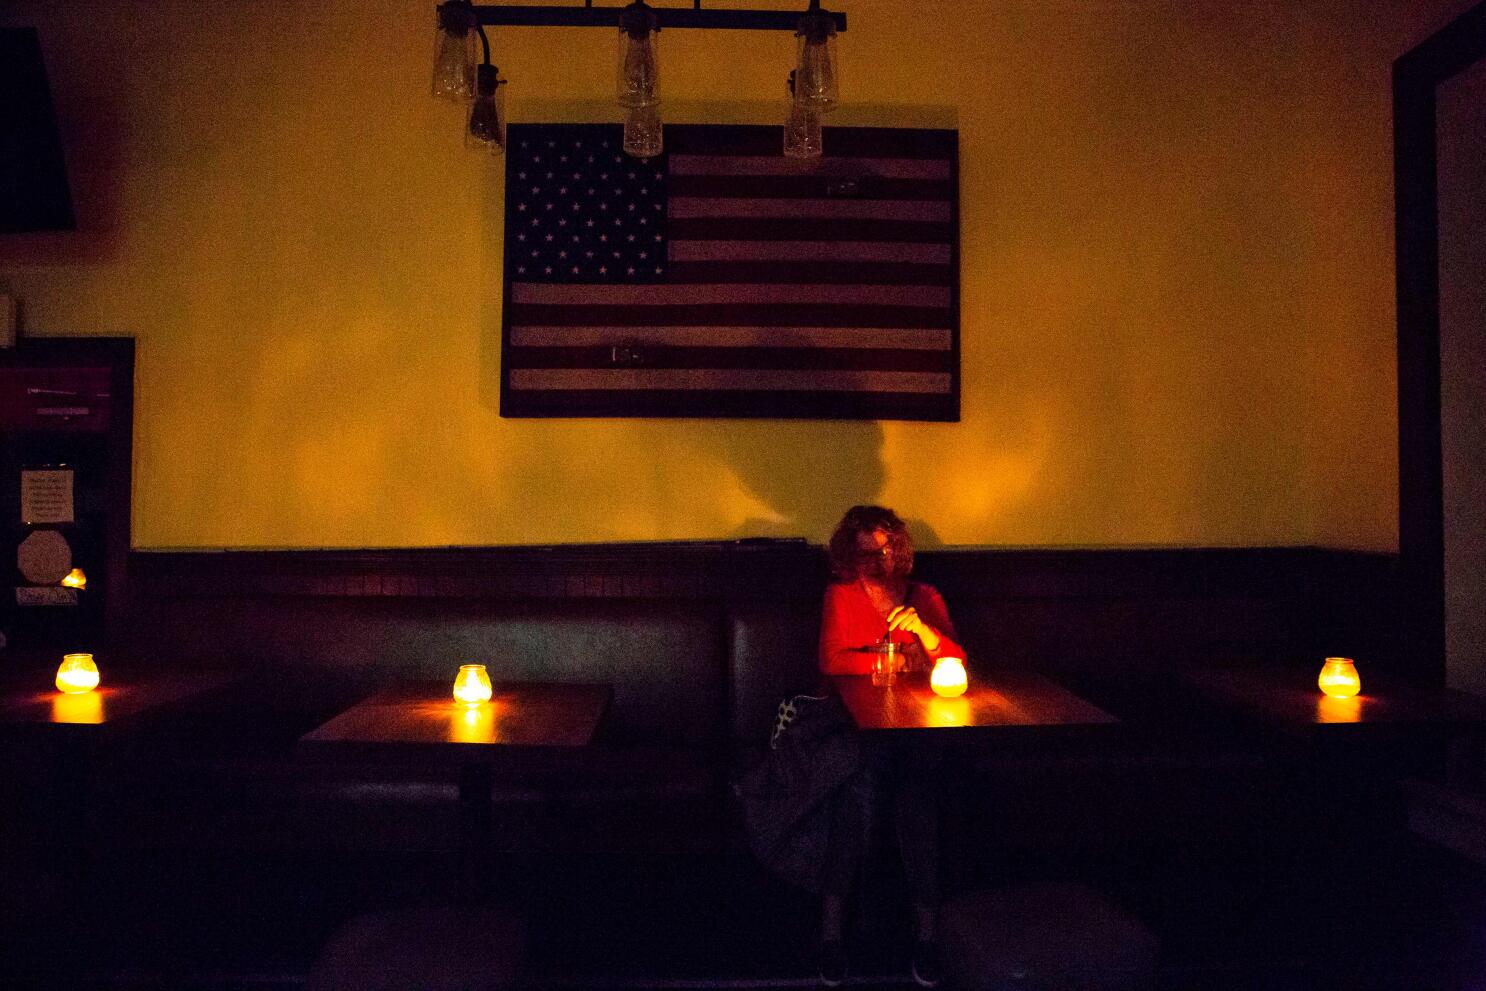 How to cope with power outages - The Washington Post